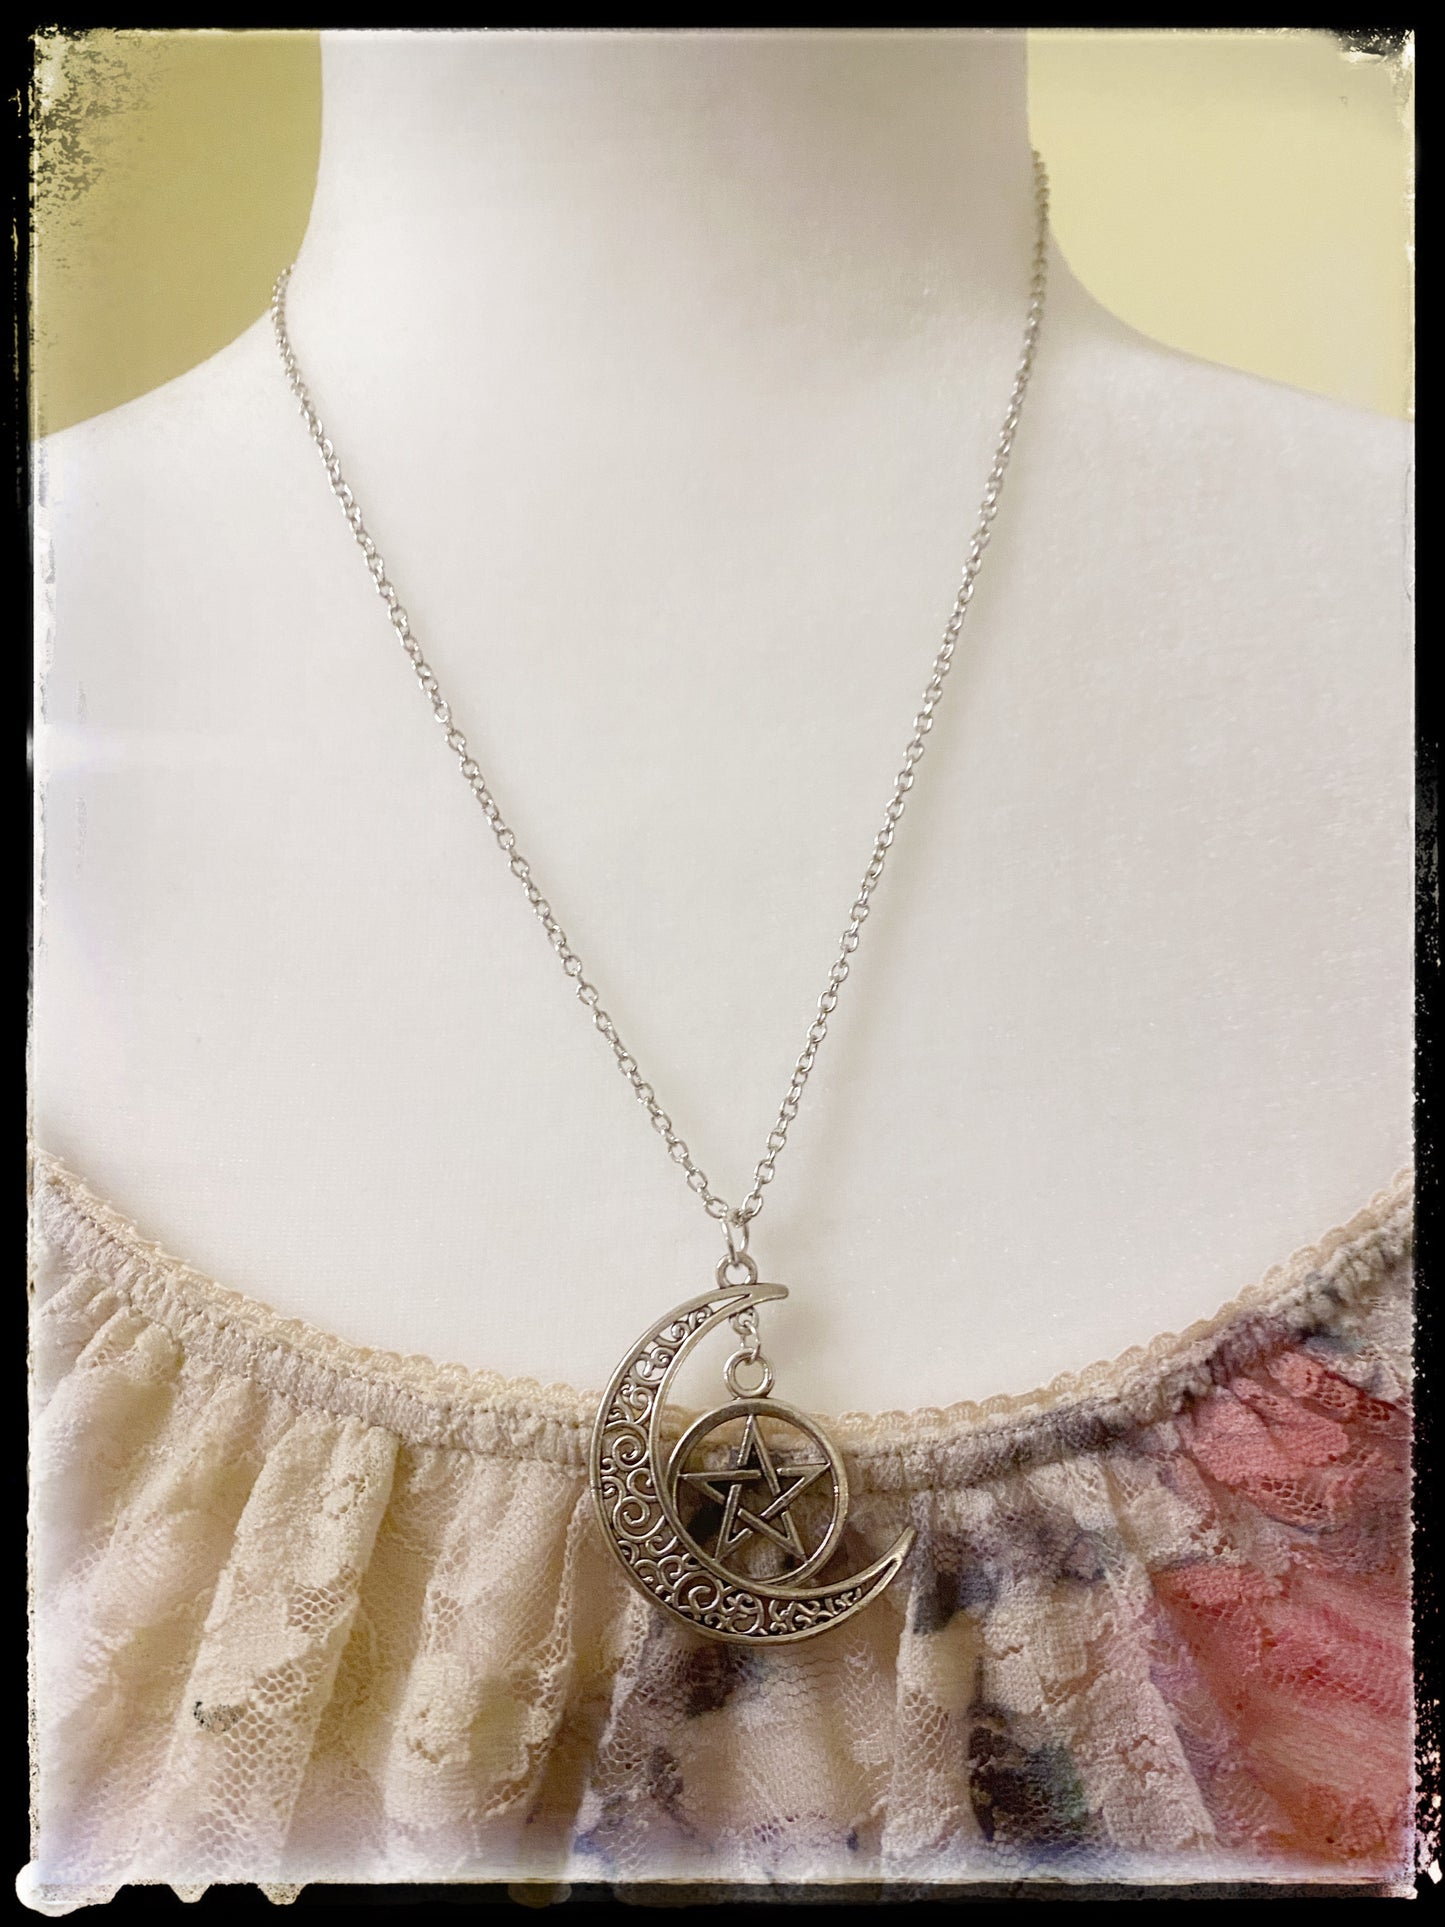 Moon and pentacle necklace